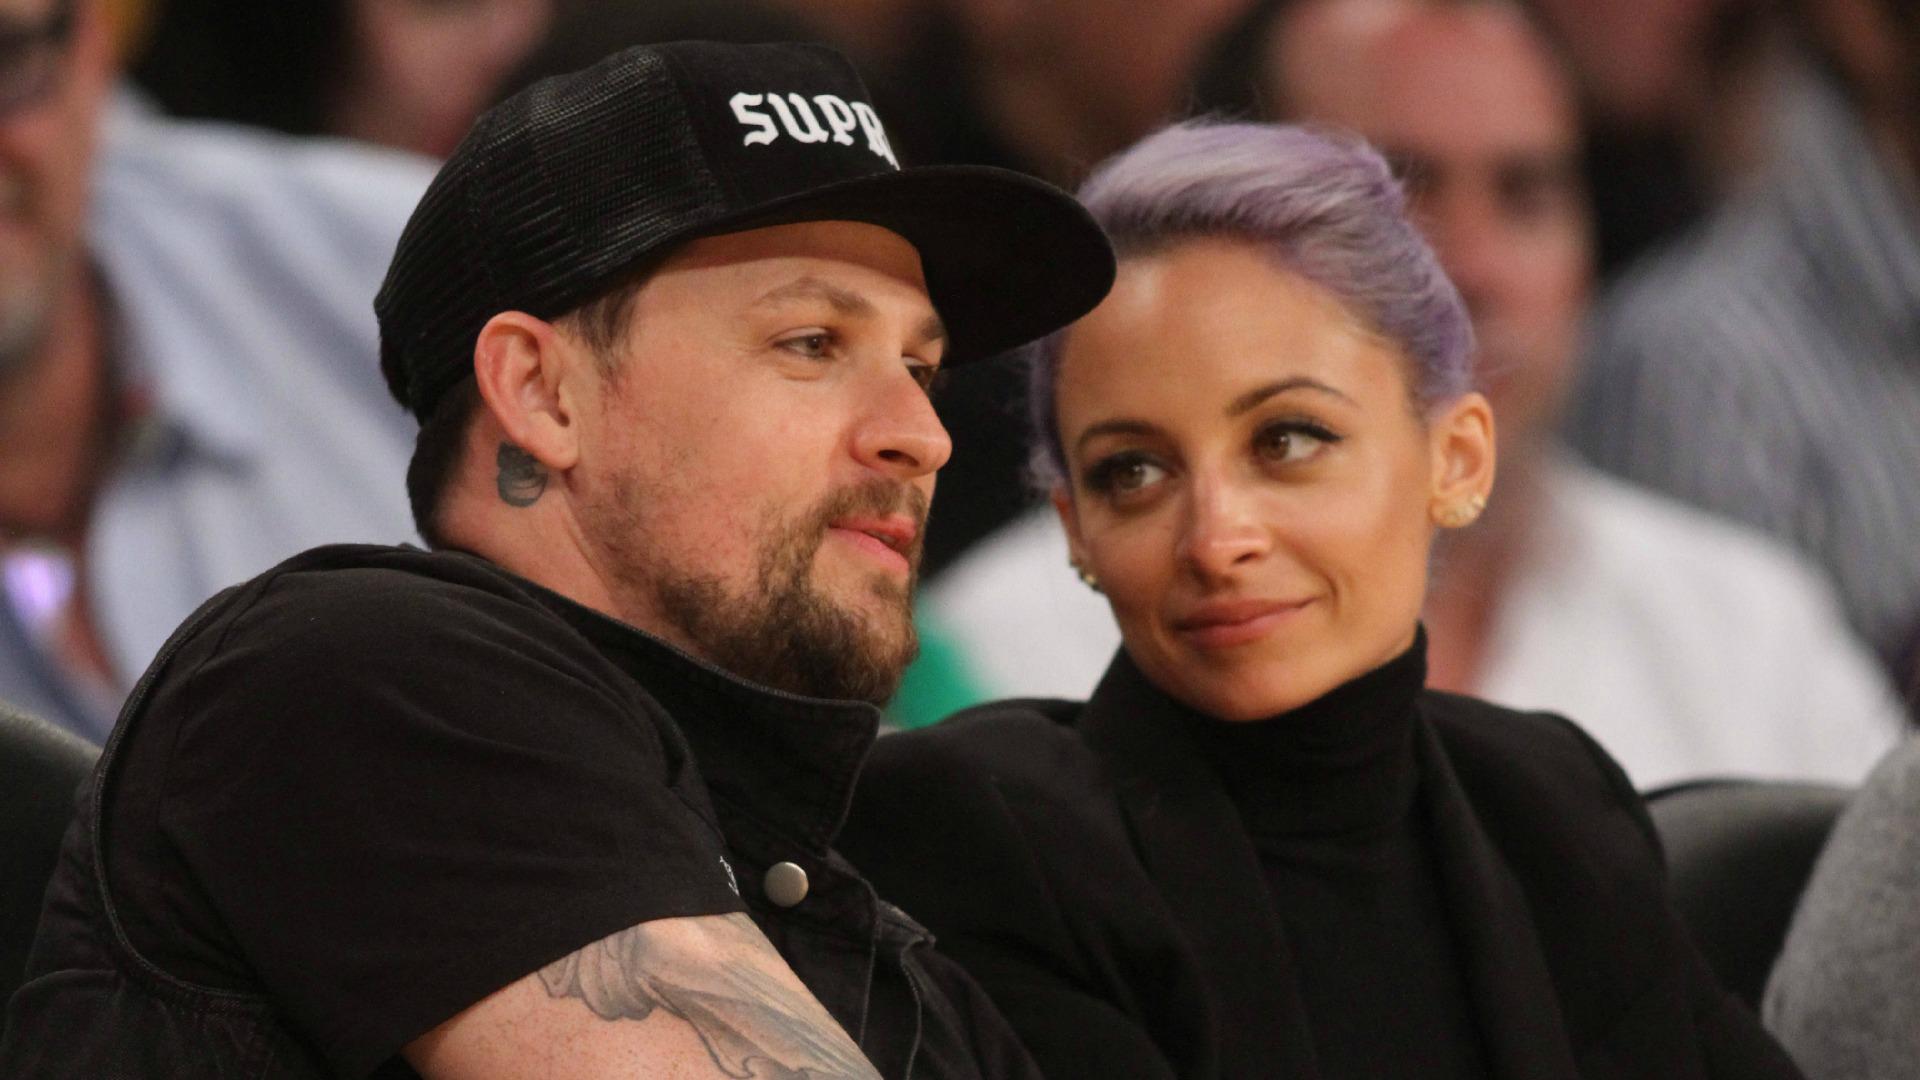 The new family of Nicole Richie and Joel Madden